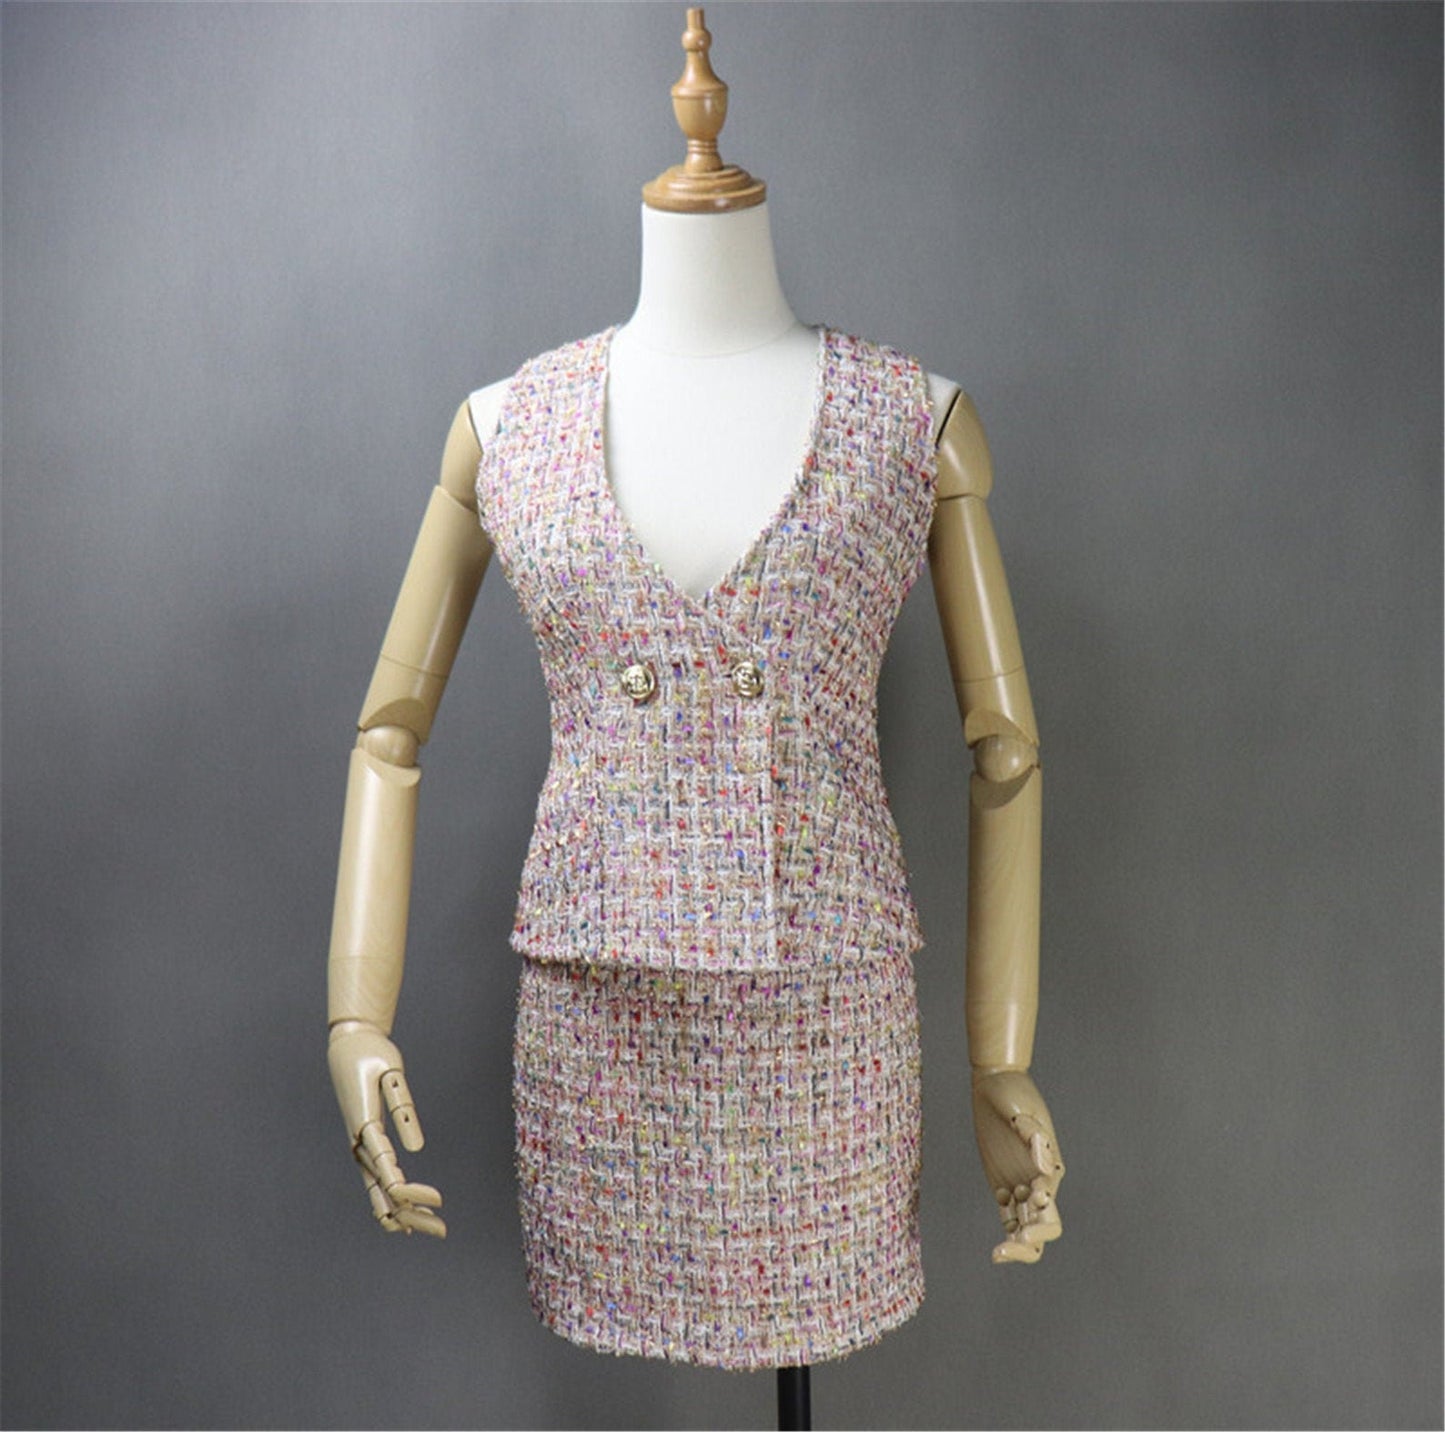 Women's Custom Made Multi-Color Tweed Coat Jacket Blazer+ Vest + Skirt 3 Pieces Suit Pink   UK CUSTOMER SERVICE!  Women's Custom Made Multi-Color Tweed Coat Jacket Blazer+ Vest + Skirt 3 Pieces Suit Pink, all of our suits can be made with a Skirt or a pair of Shorts or Trousers.  All items are made to order. Please advise your height, weight and body measurements ( Bust, shoulder, Sleeves, Waist and Length etc). Our tailors will make the order for you!